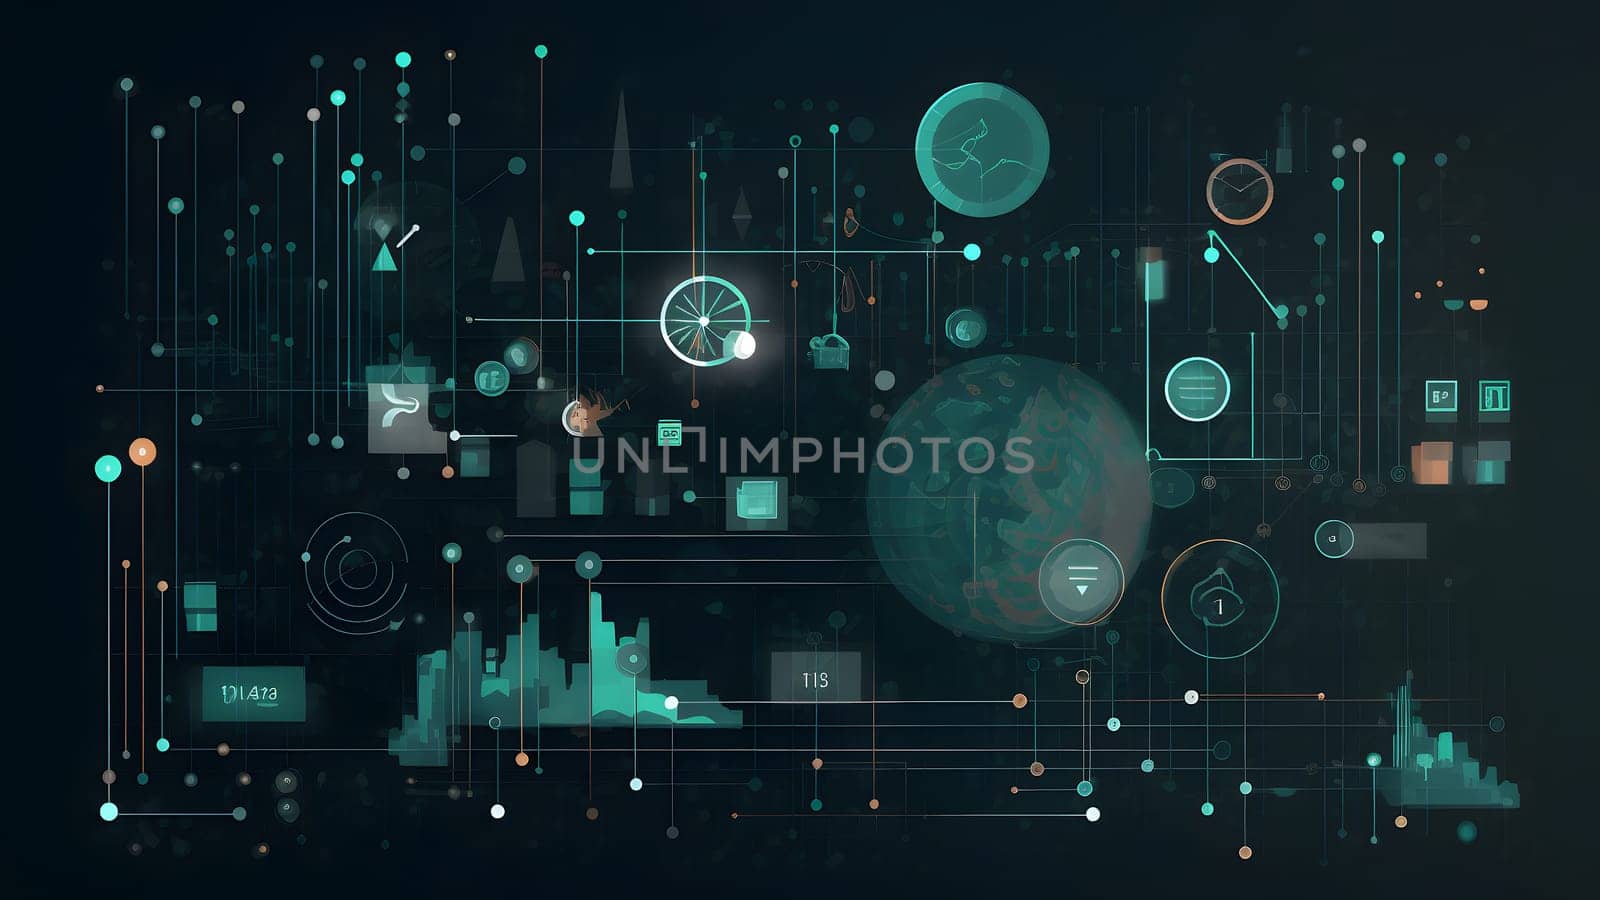 data science-inspired wallpaper depicting the visual and modern process of data collection, cleaning, analysis, and visualization, neural network generated image by z1b